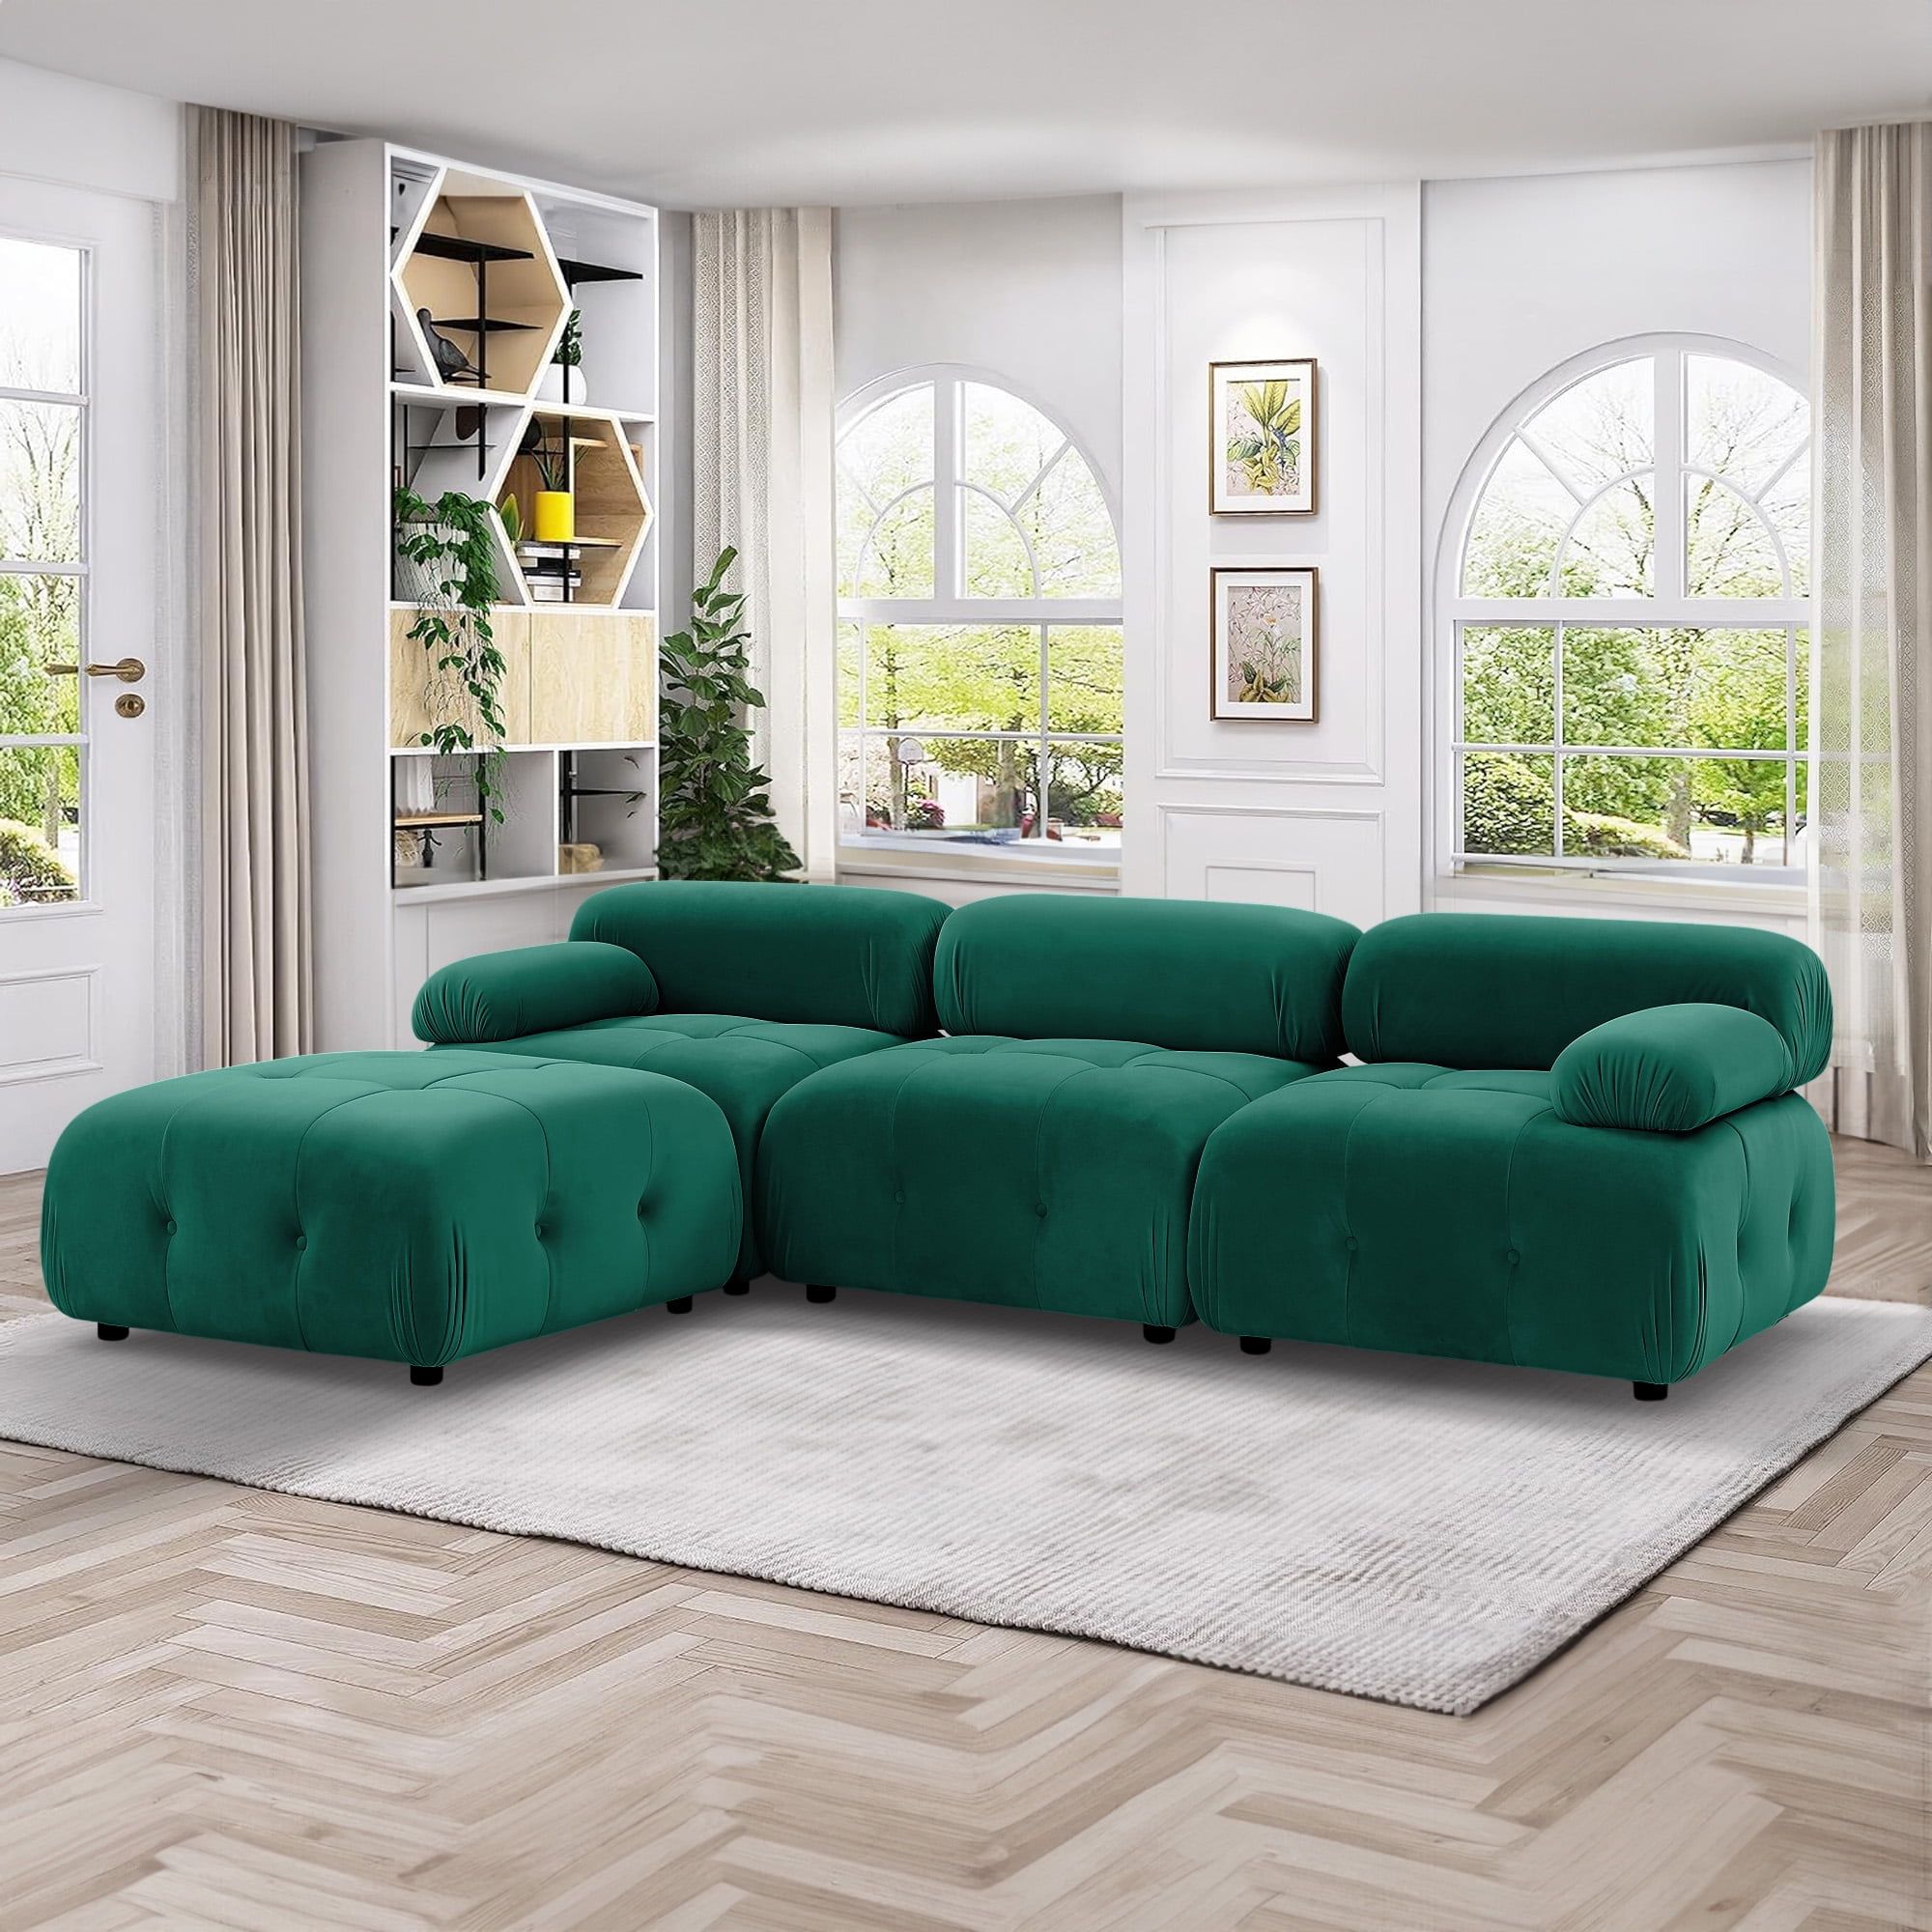 Aukfa 93" Sectional Sofa, Living Room Modular Couch With Ottoman, Pillow  Top Arms, Velvet, Green – Walmart Inside Green Velvet Modular Sectionals (Photo 4 of 15)